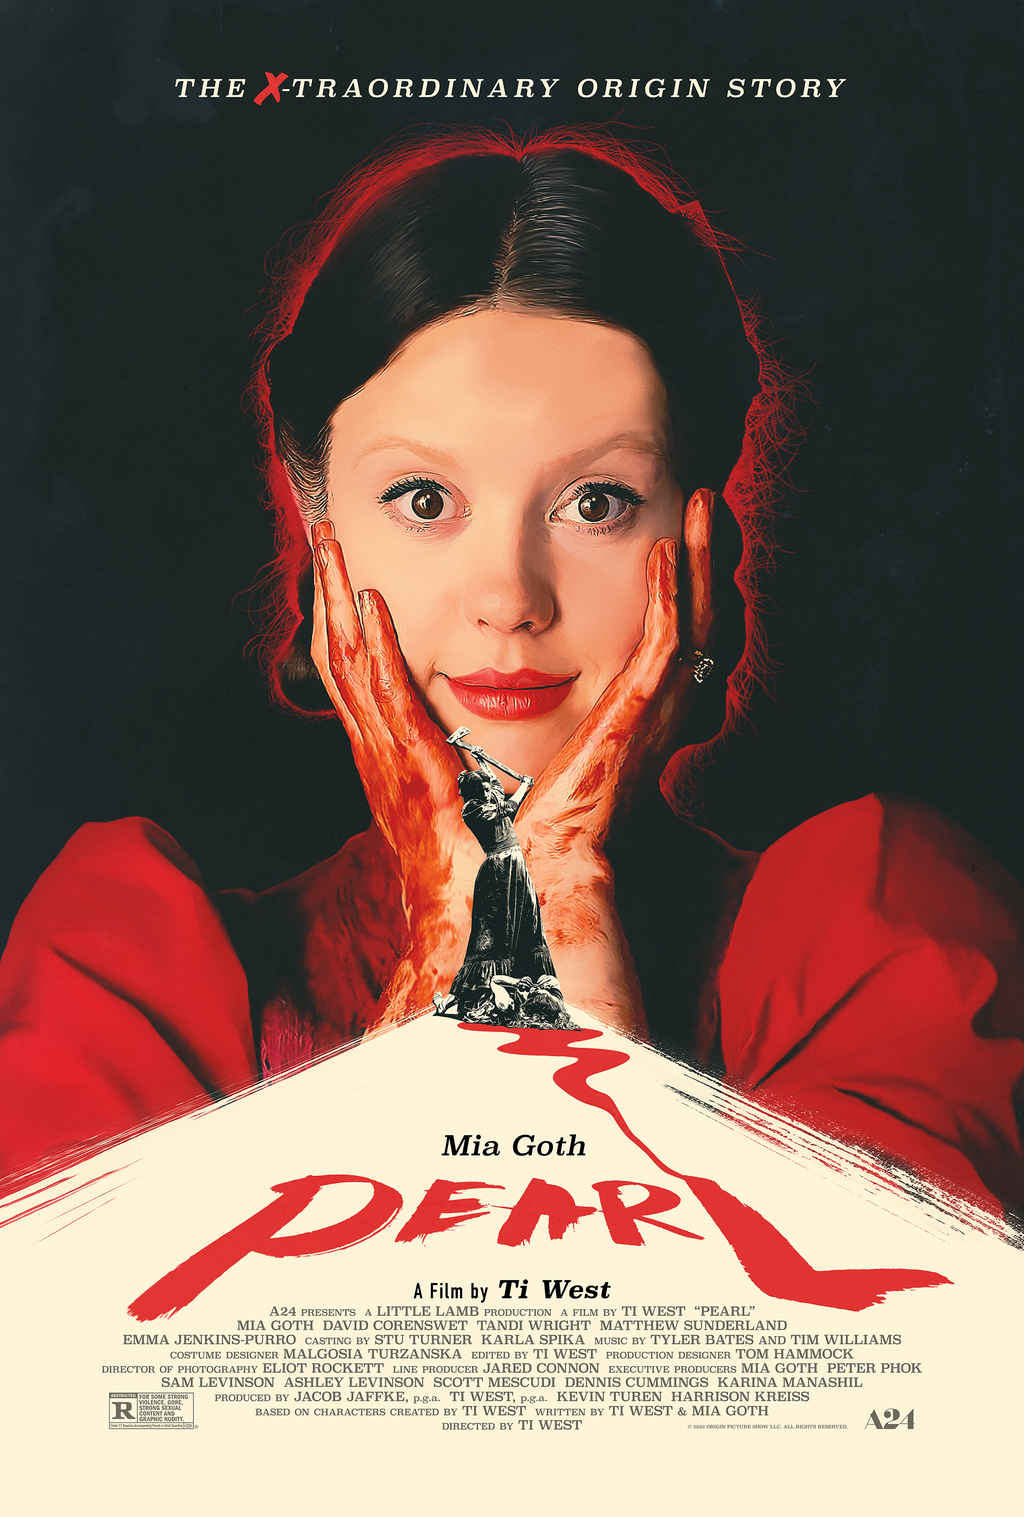 Pearl movie poster, distributed by A24